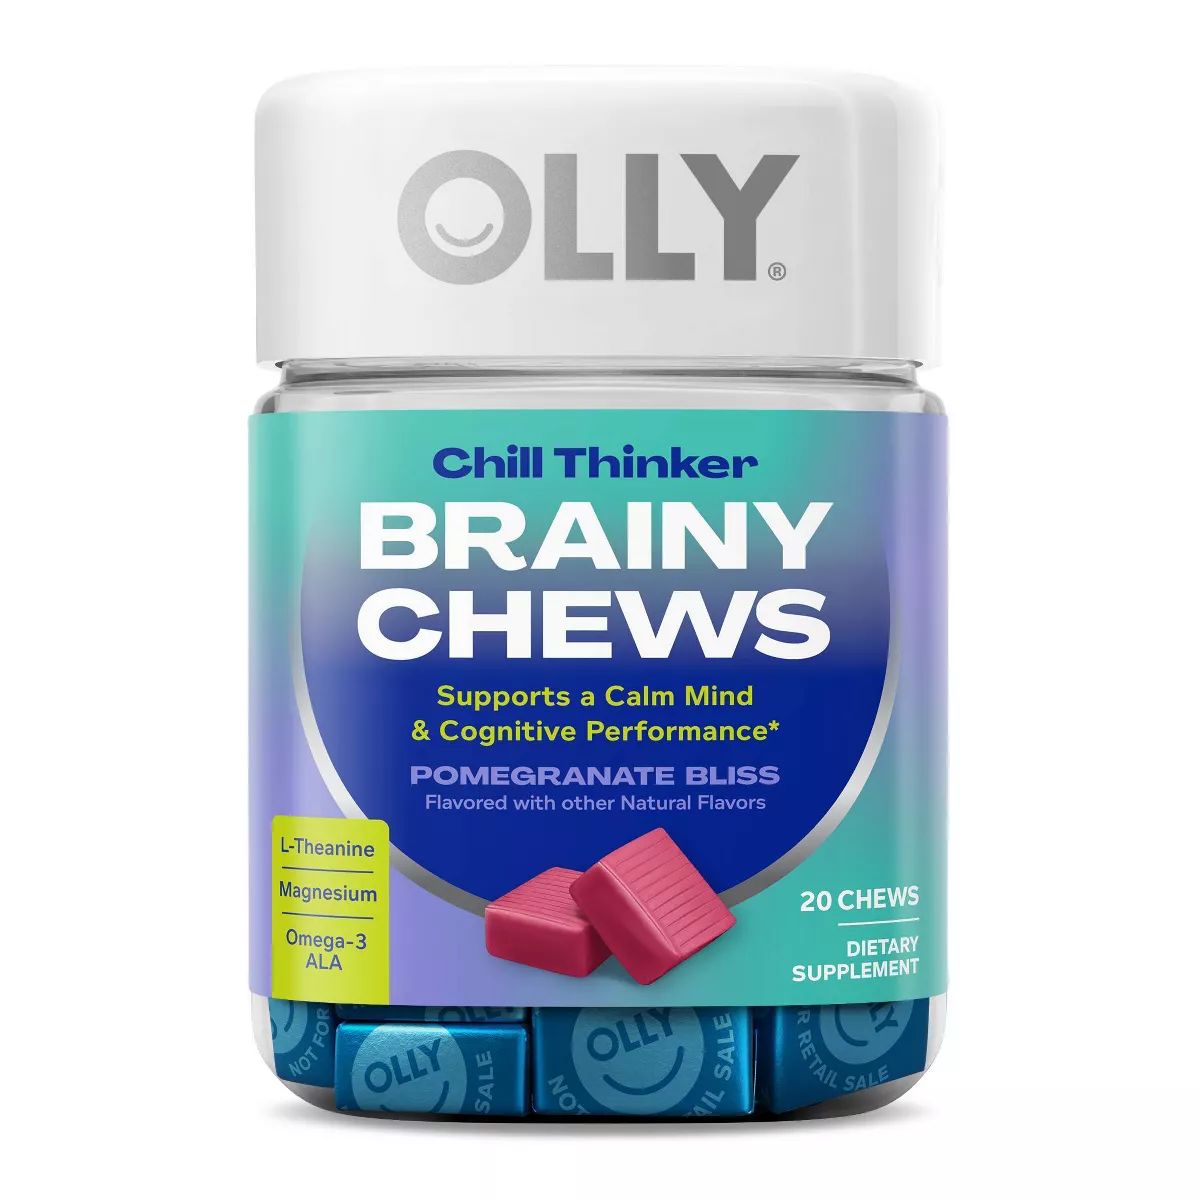 OLLY Brainy Chews - Chill Thinker - 20ct | Target